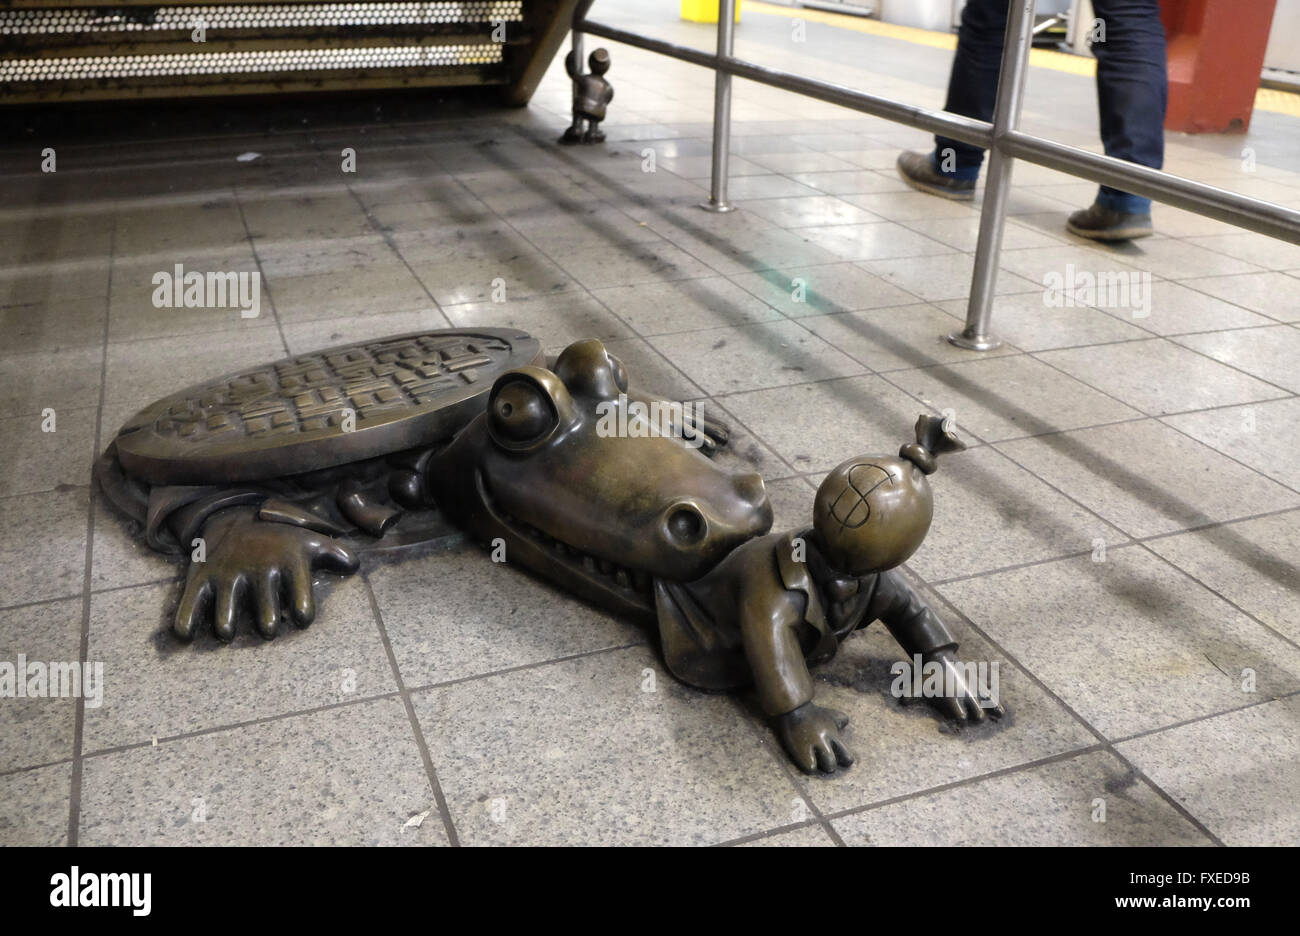 A bronze art installation of a crocodile located in 14th Street Station in New York City, United States of America. Stock Photo